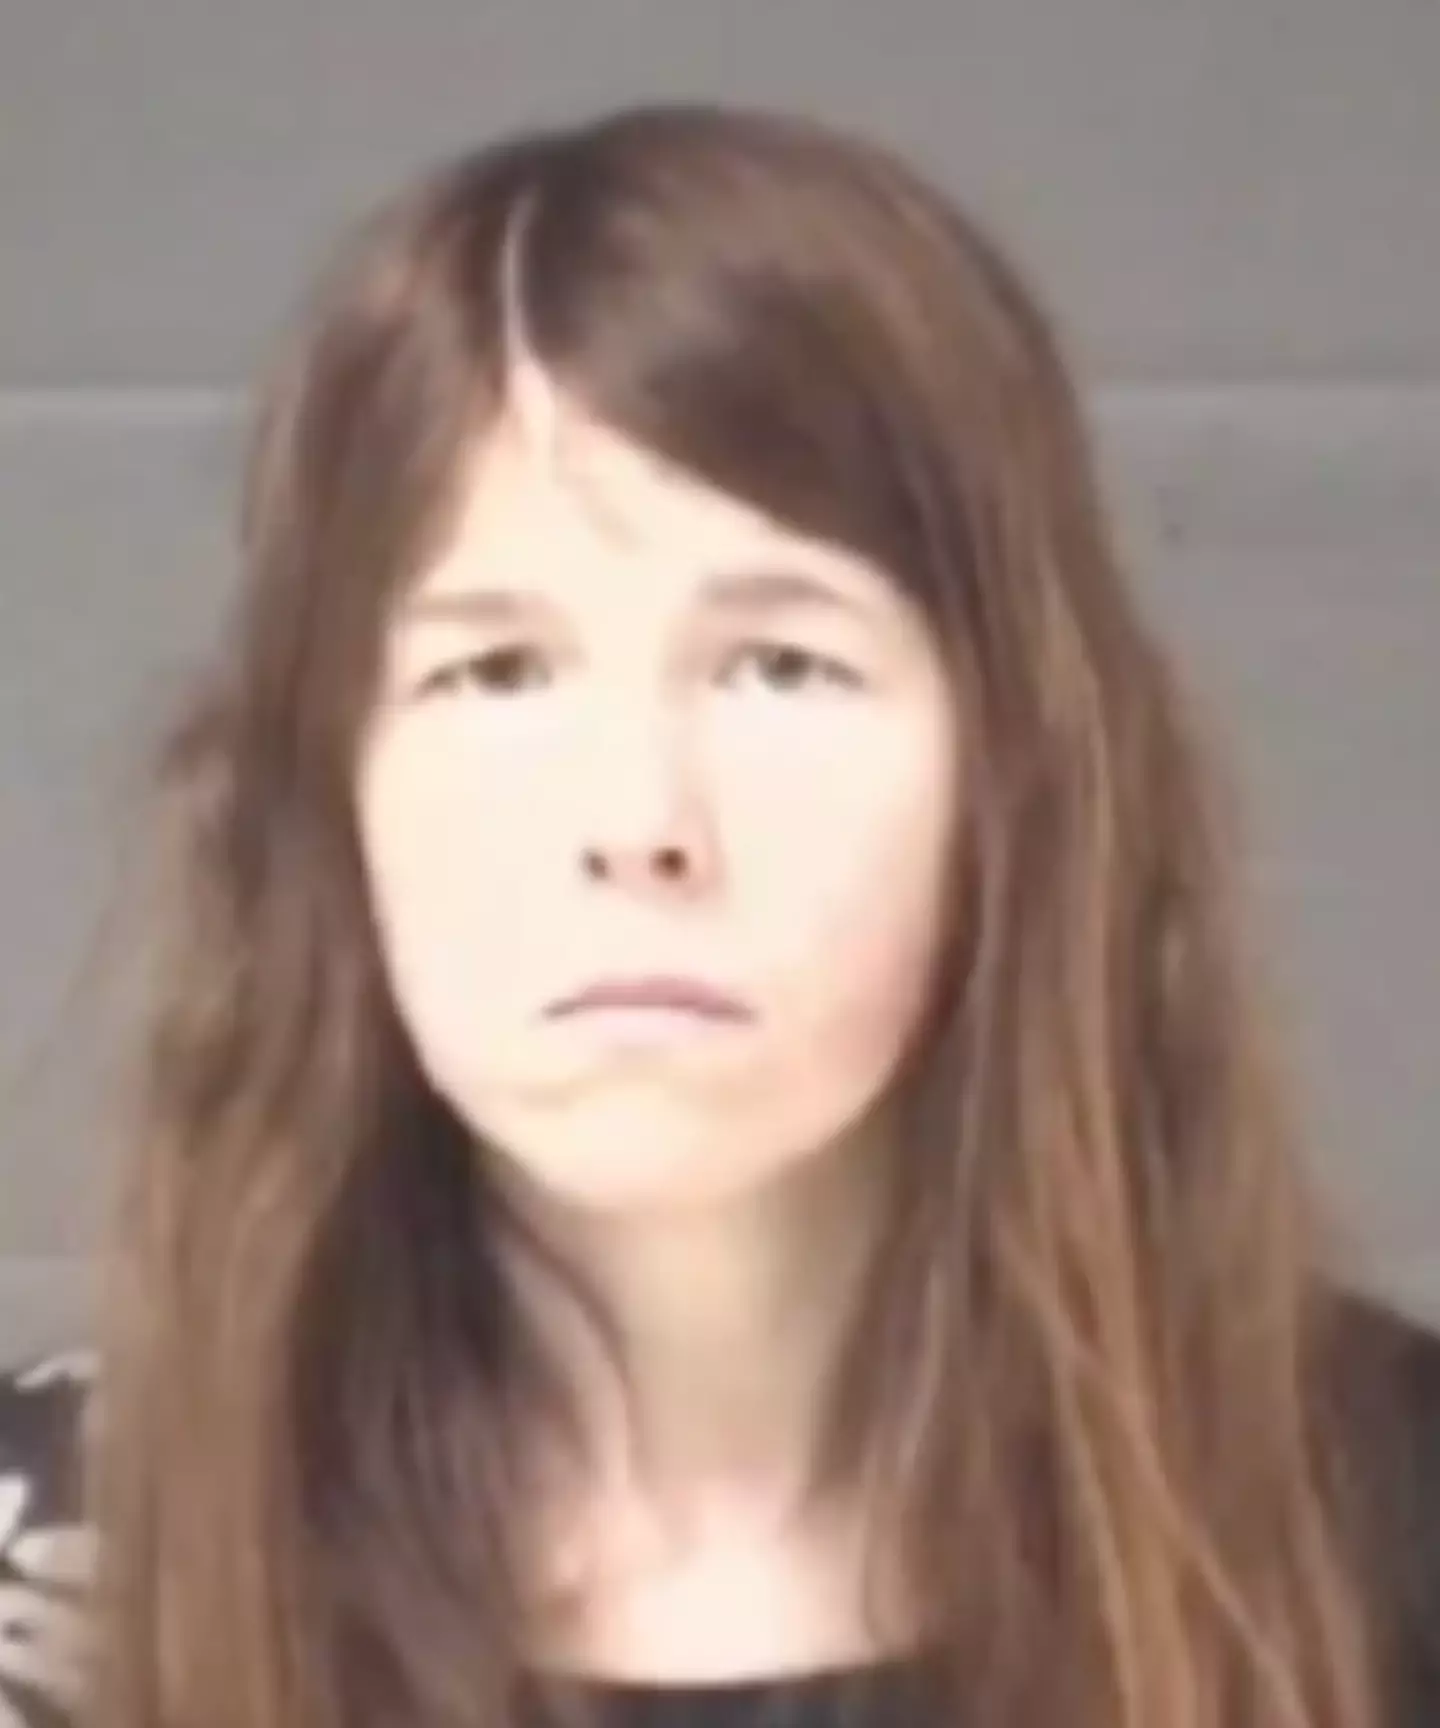 Heather Unbehaun is reportedly being held on $250,000 bond and is awaiting extradition.